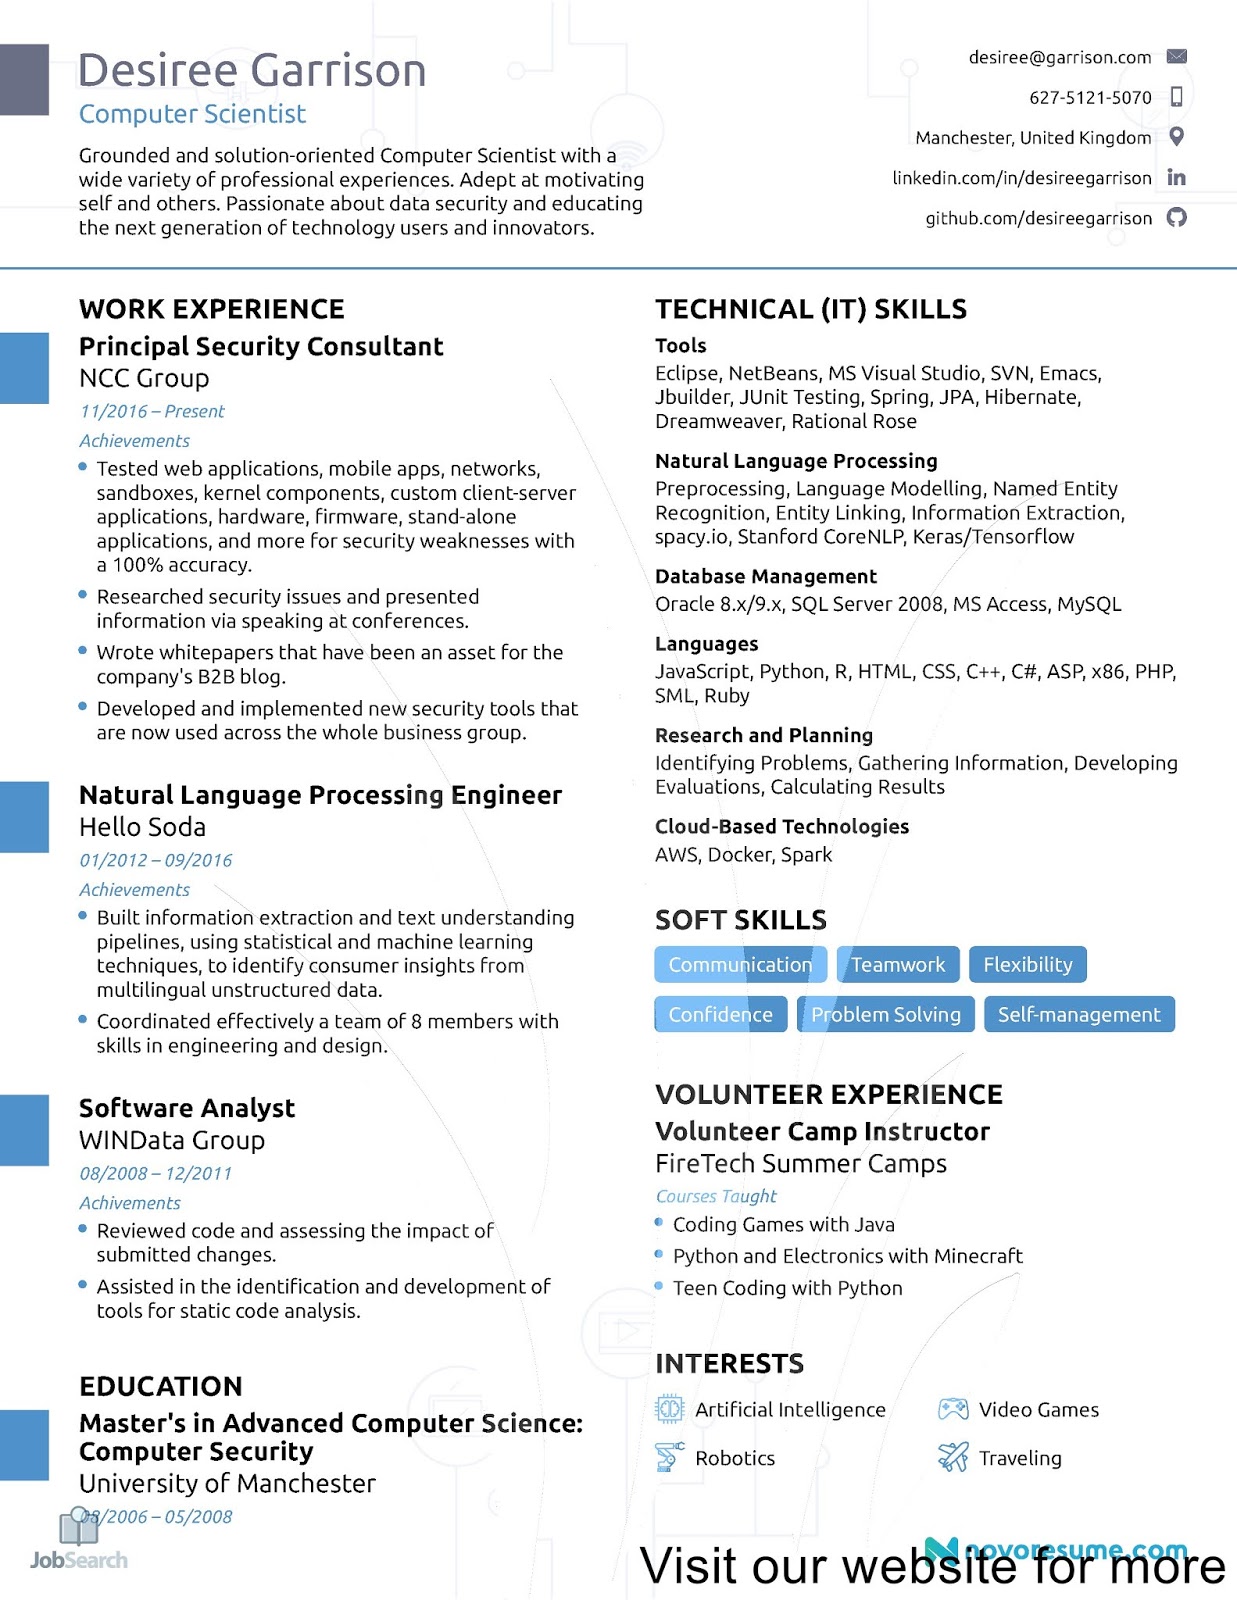 basic resumes examples simple resumes examples Basic Resumes Examples 2020 examples of basic resumes for jobs basic examples of resumes simple resume examples word